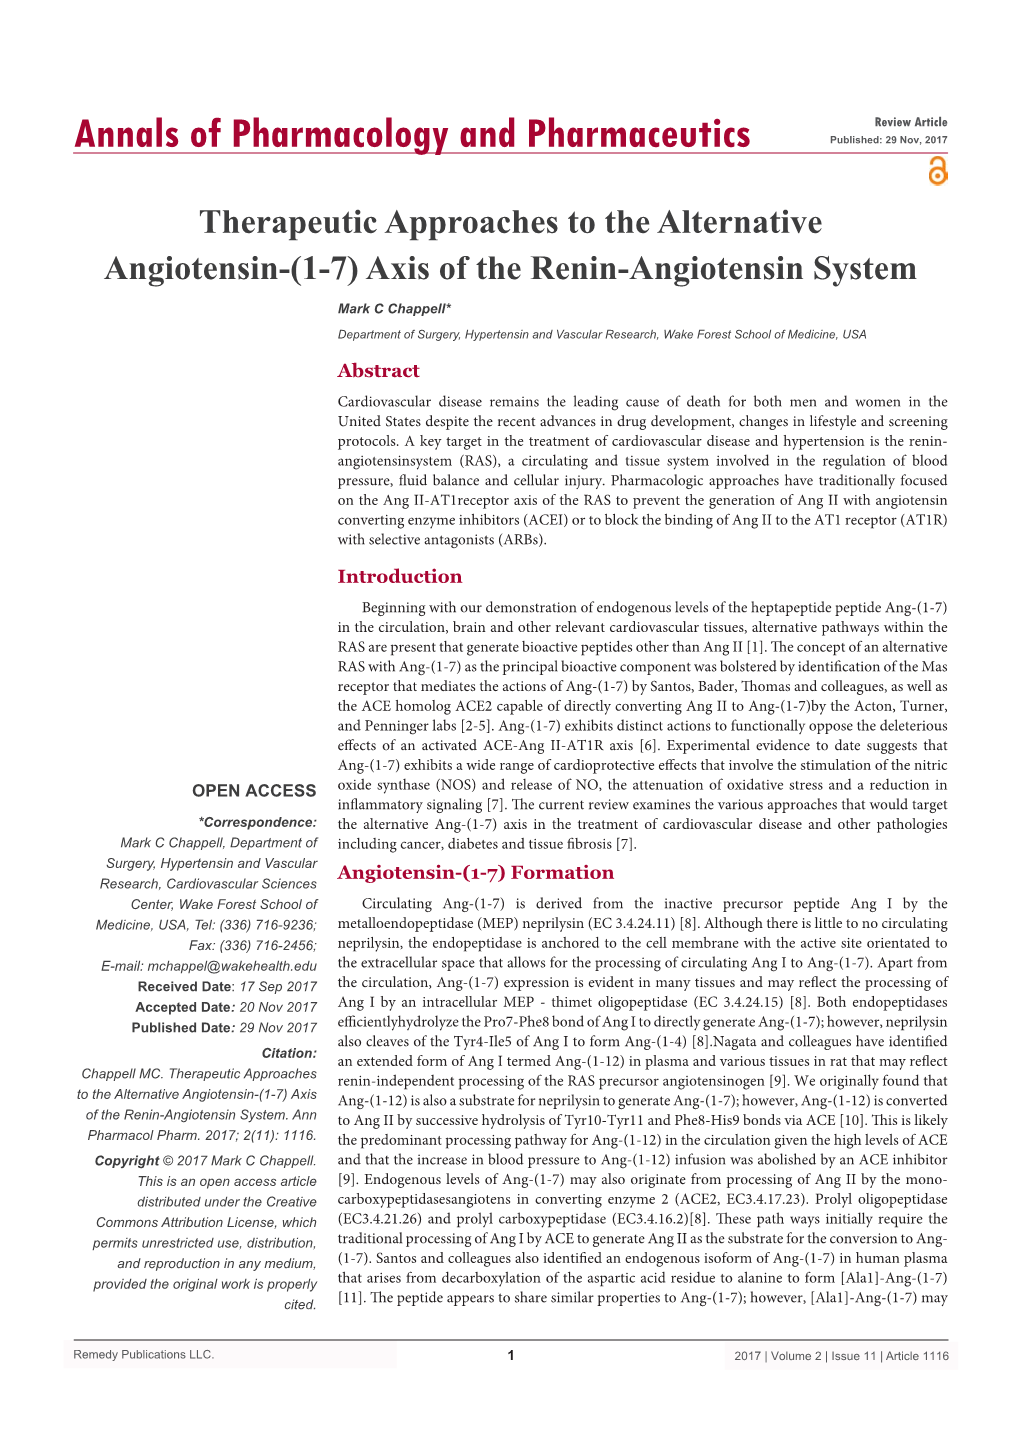 Axis of the Renin-Angiotensin System